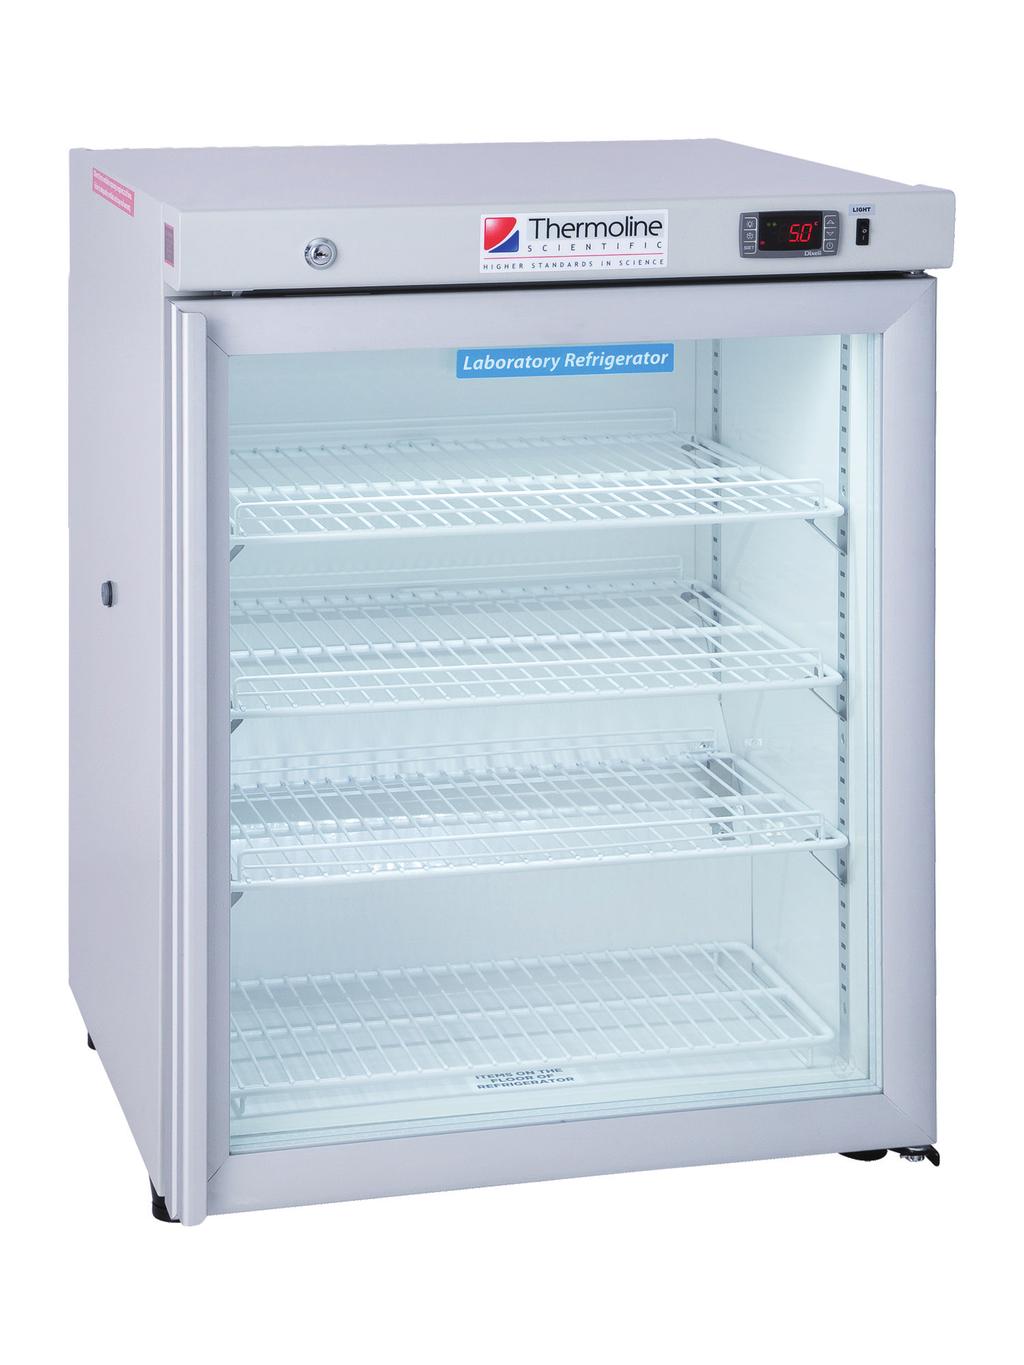 (Image: TELR-145-1-GD) Applications and design features Four Economy Laboratory Refrigerators are available up to 740 litres in capacity to meet the general purpose laboratory requirements for